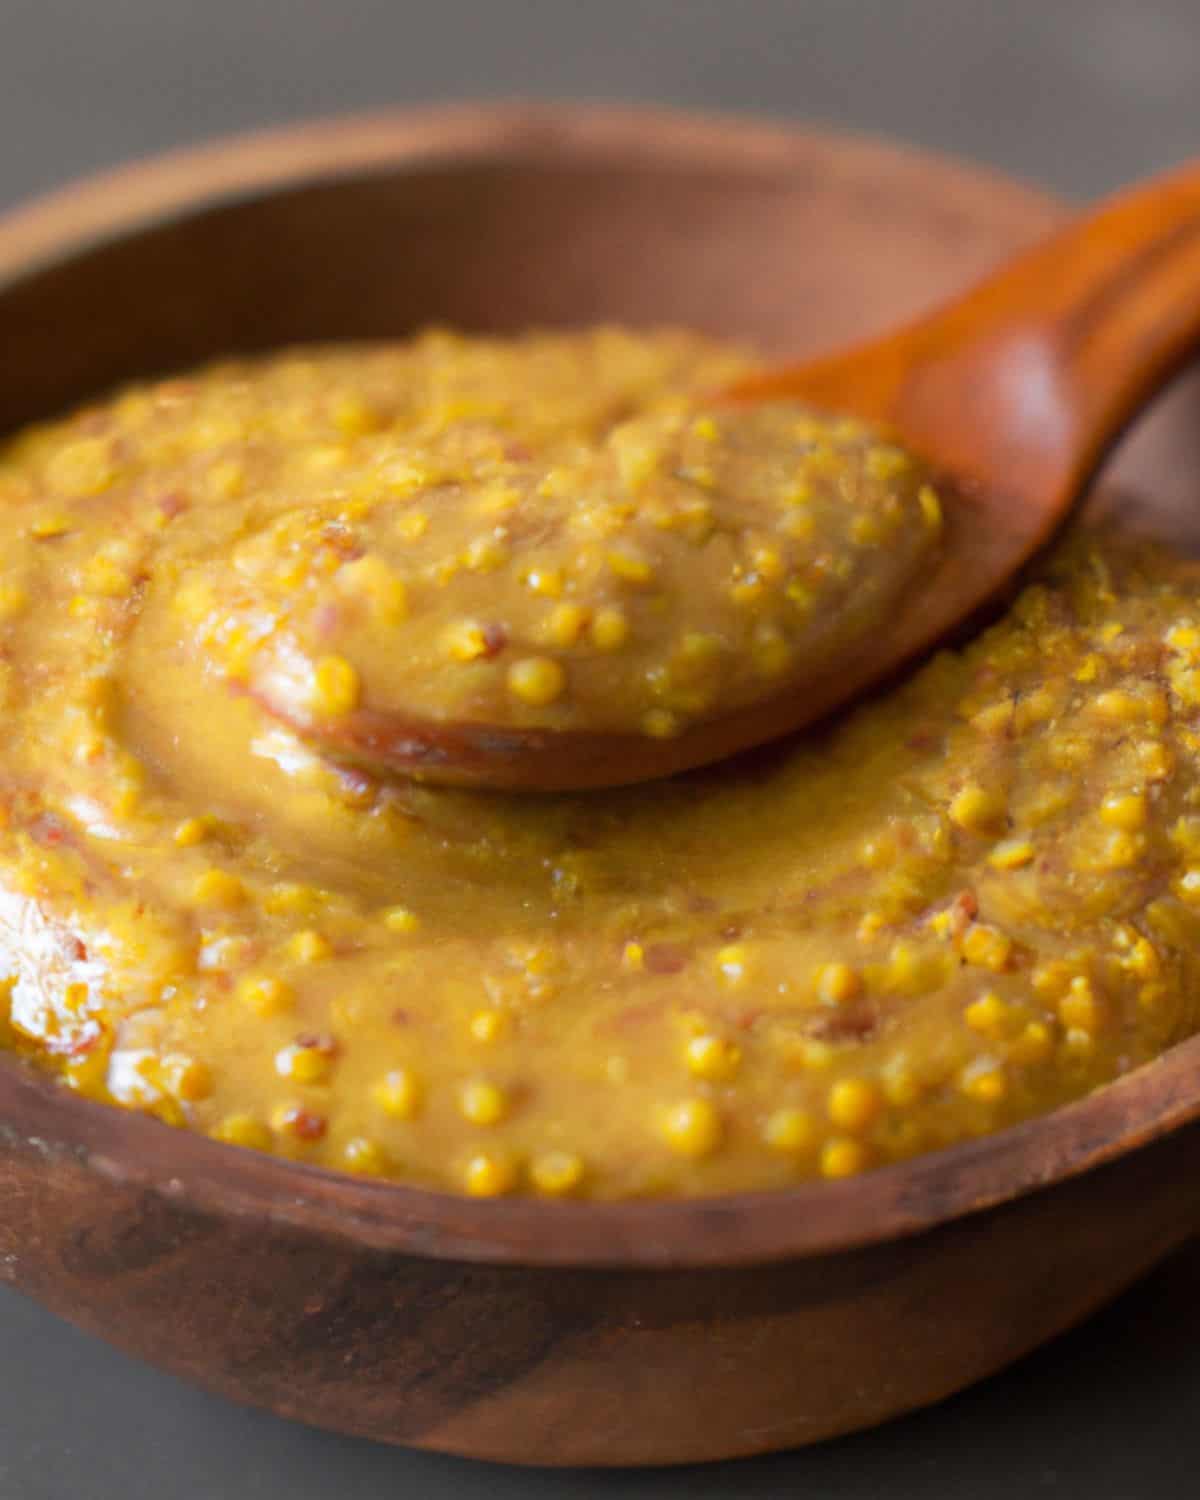 Sone ground mustard in a wooden bowl with a spoon.